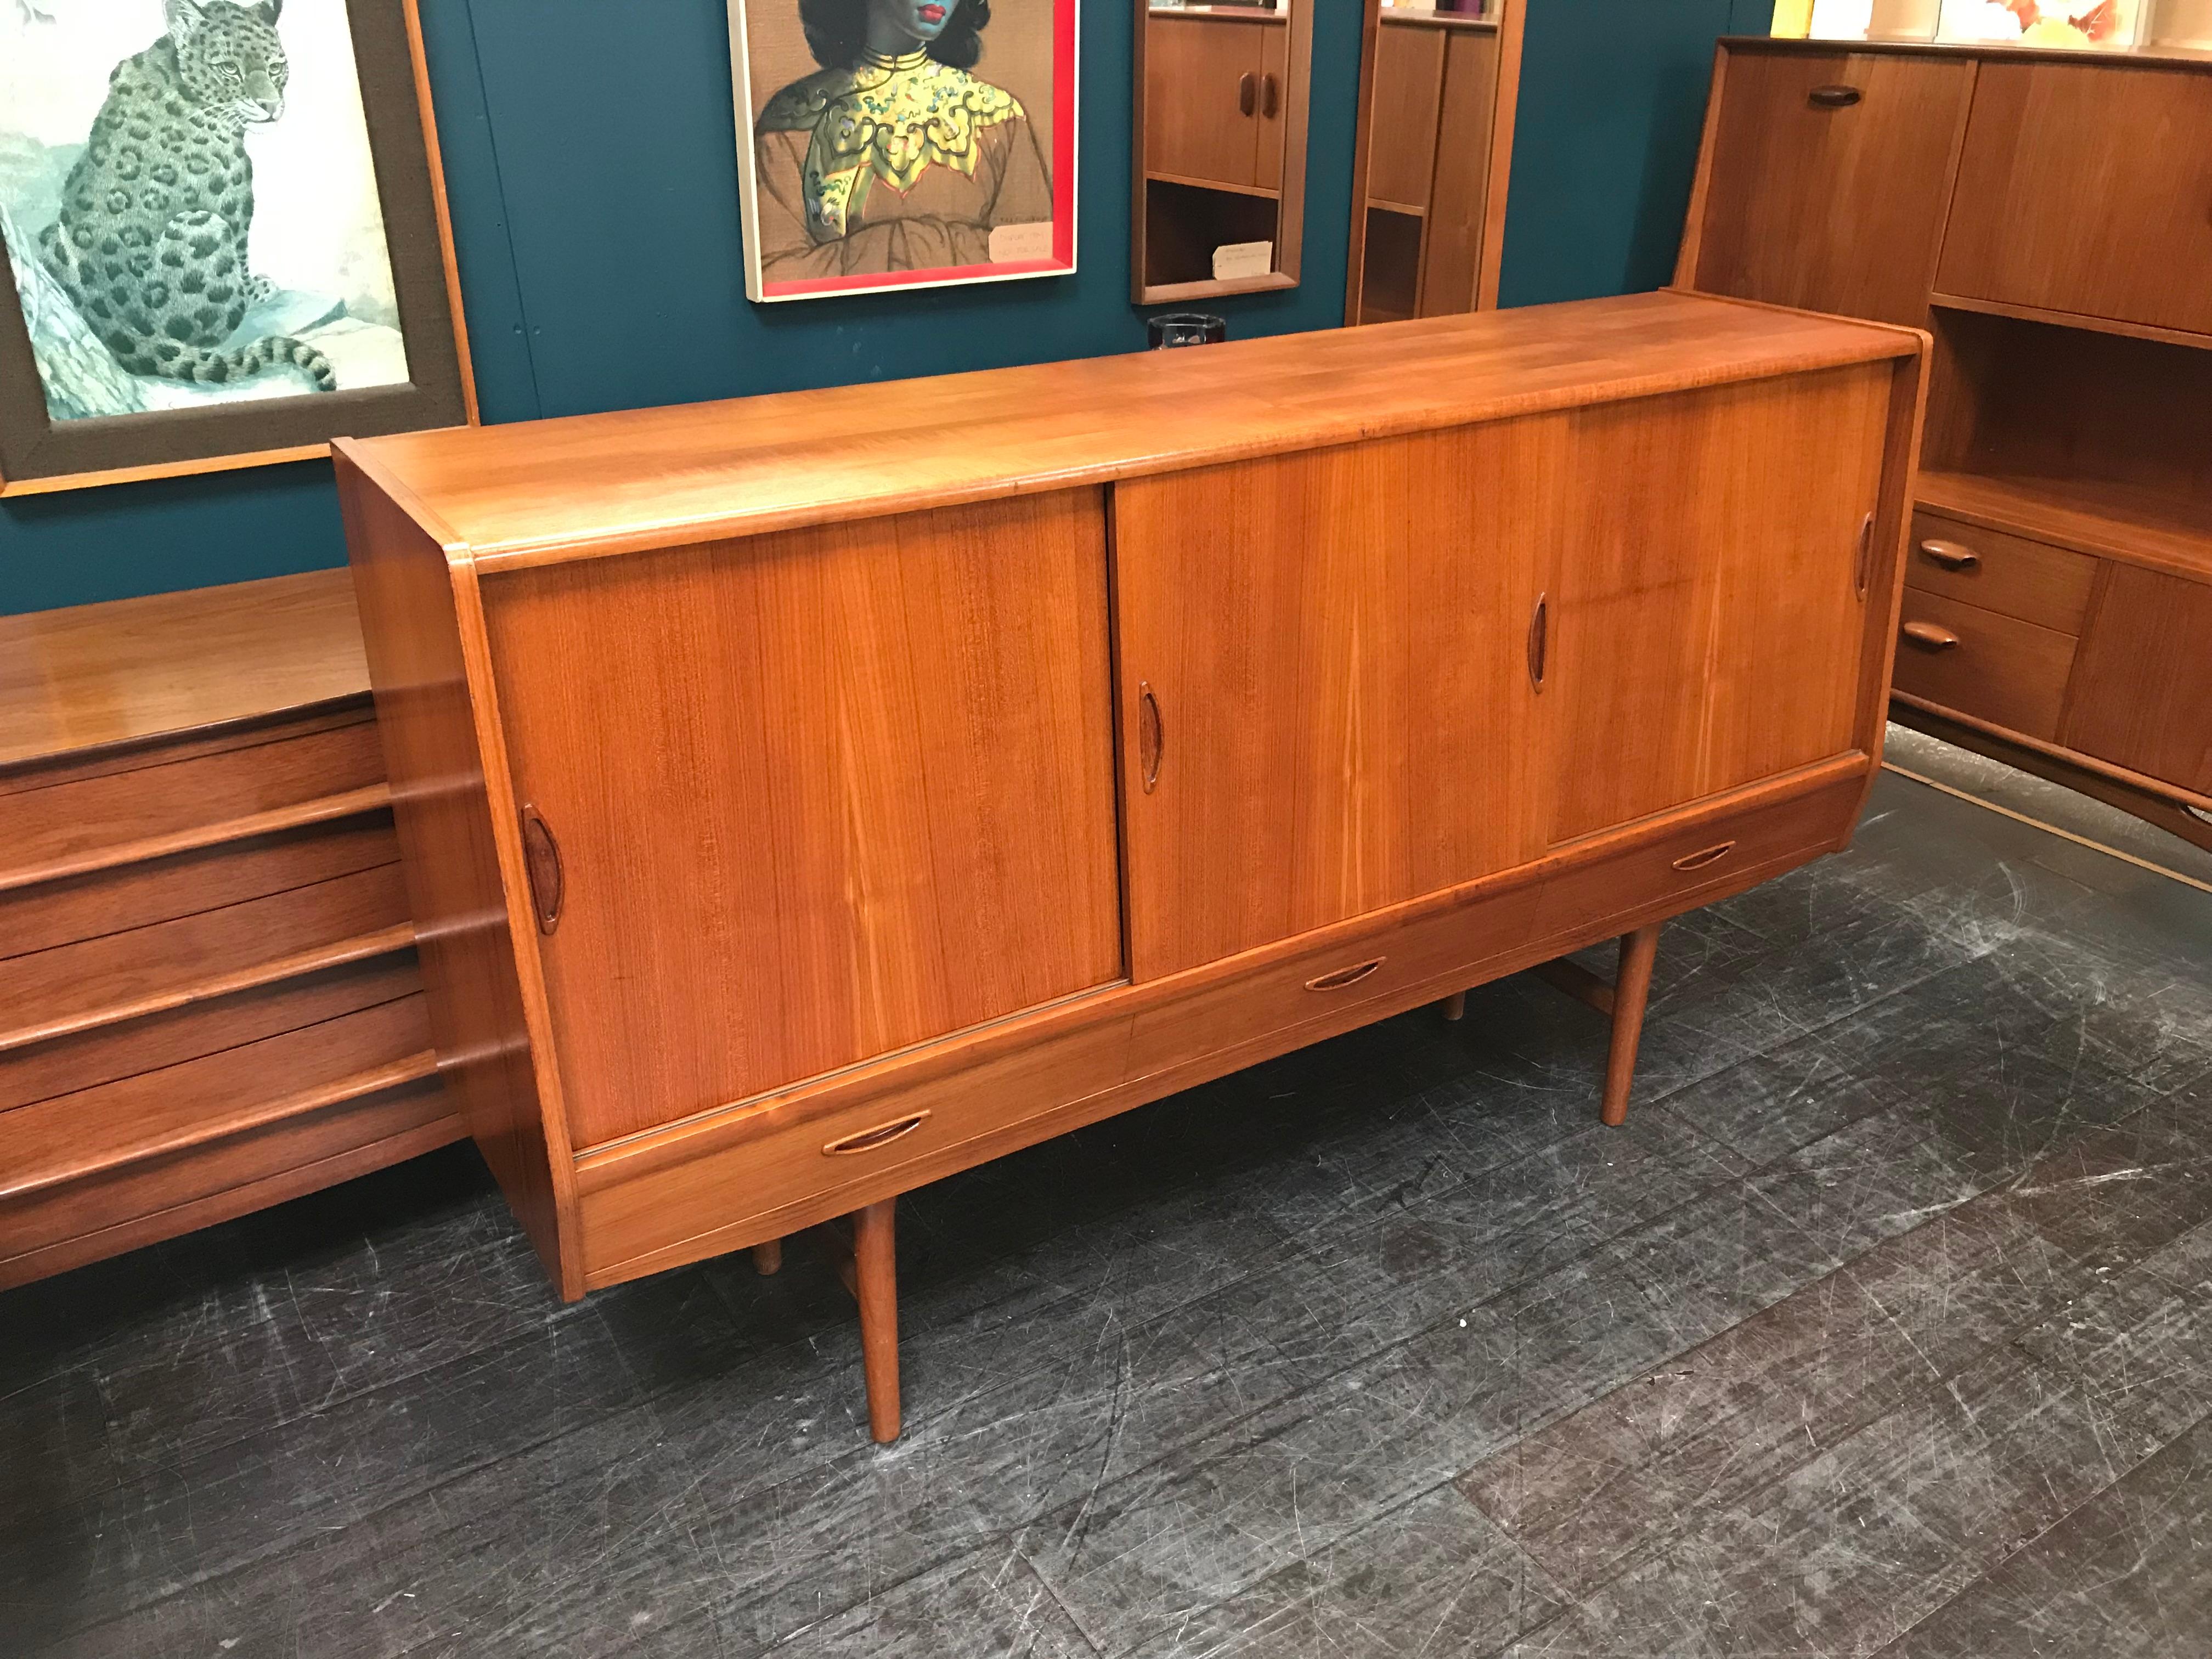 A stunning Danish sideboard in teak, manufactured by Aerthoj Jensen & Molholm of Herning, Denmark in the 1960s. Consists of 3 sliding doors above 3 drawers, all with beautifully shaped handles. The area behind the middle door can be used as a drinks